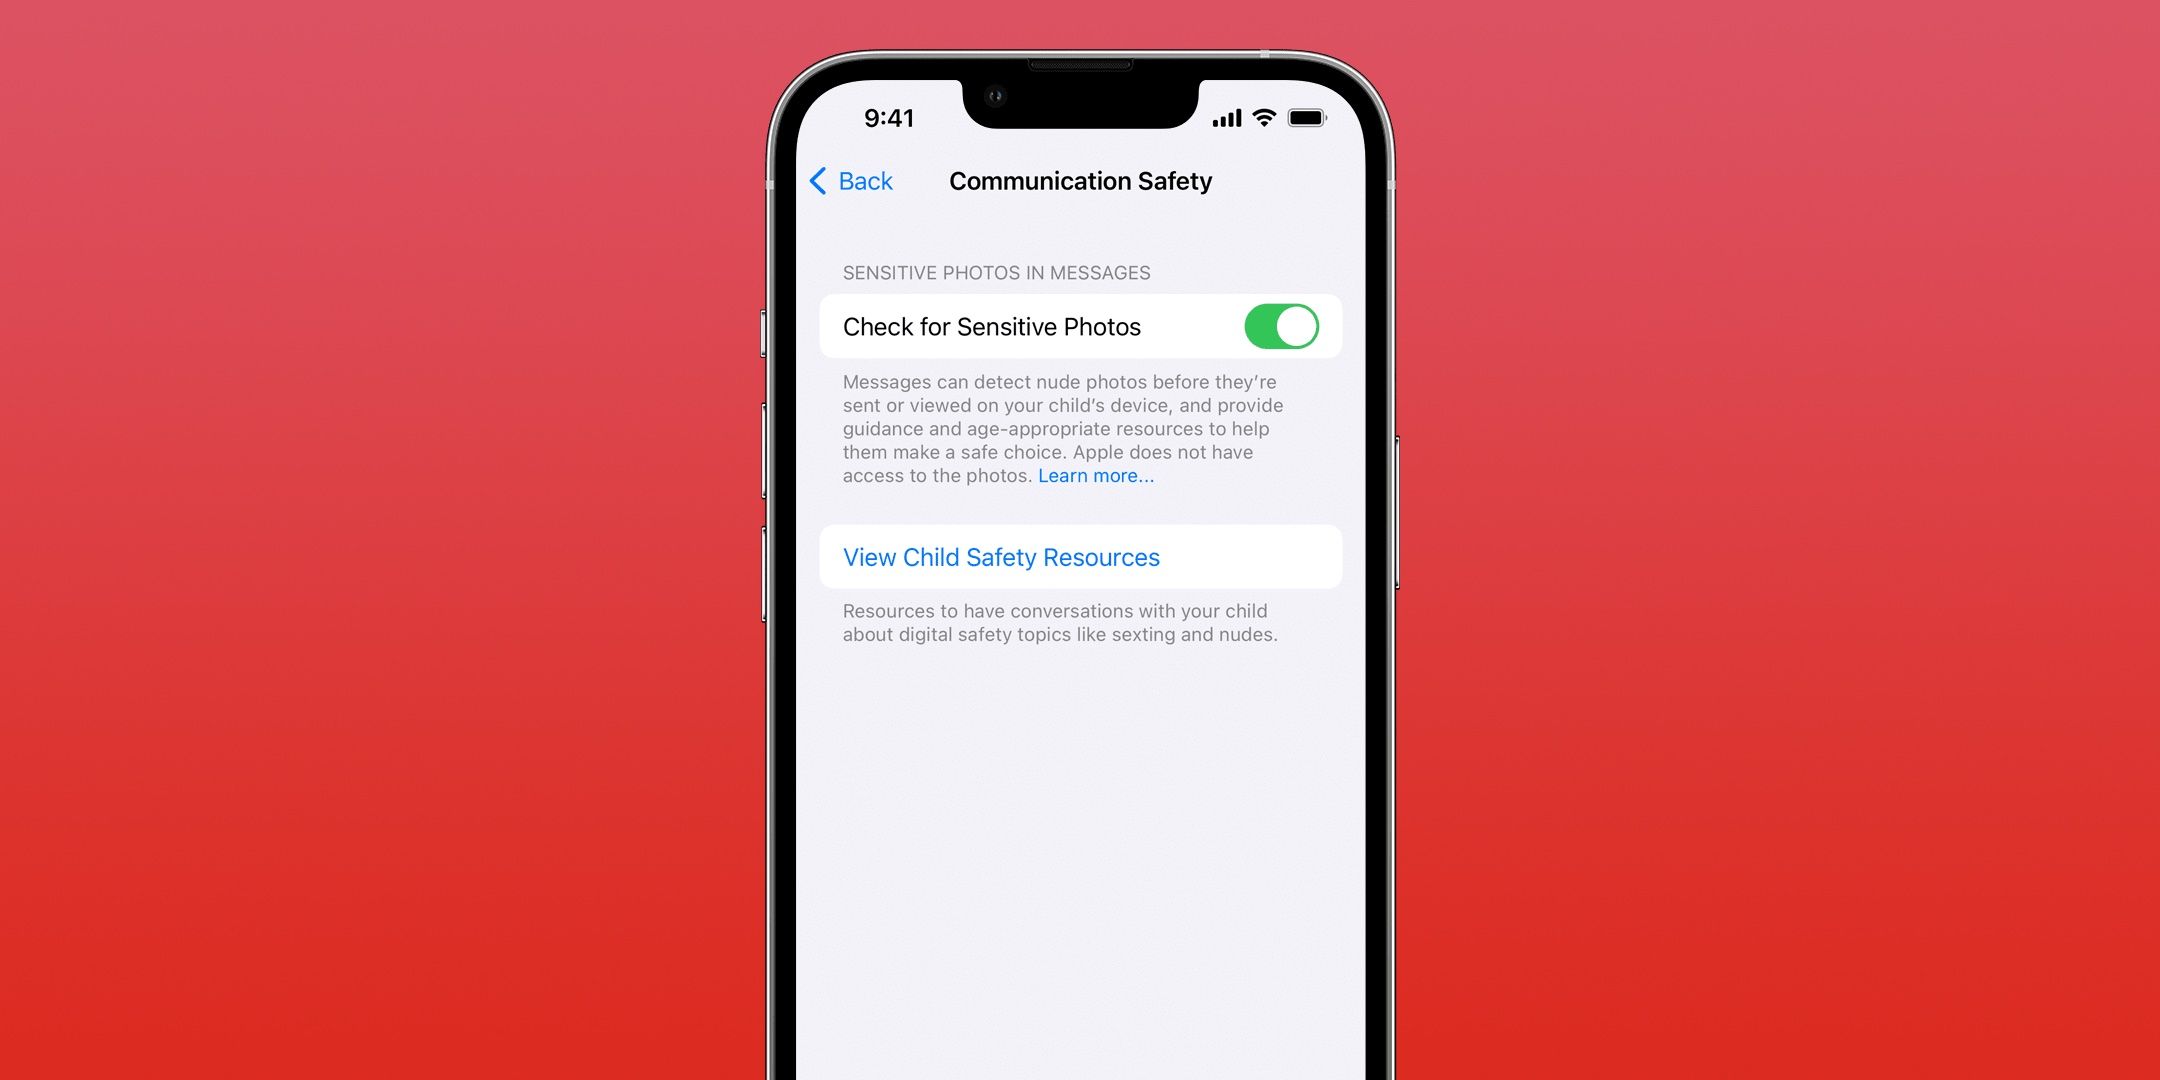 The Communication Safety settings using Screen Time on iOS.